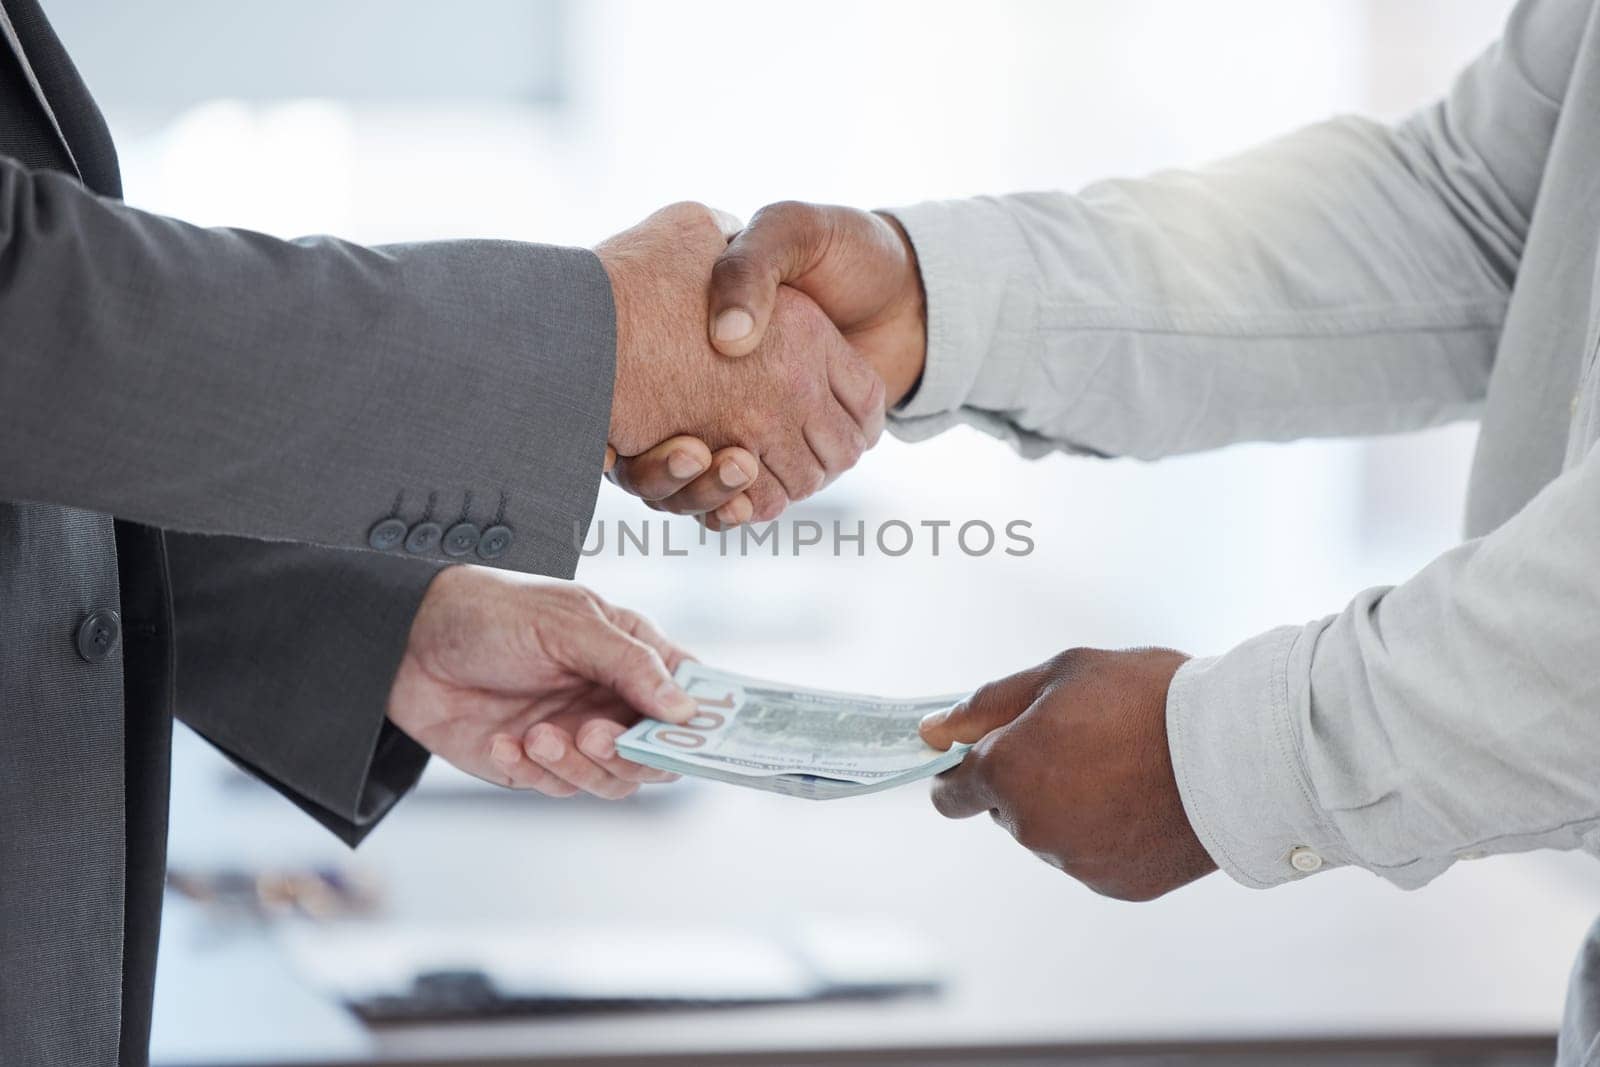 Handshake, money and crime with a business man taking a bribe in the office for a deal or agreement. Finance, payment and fraud with a male employee shaking hands in a partnership of corruption.